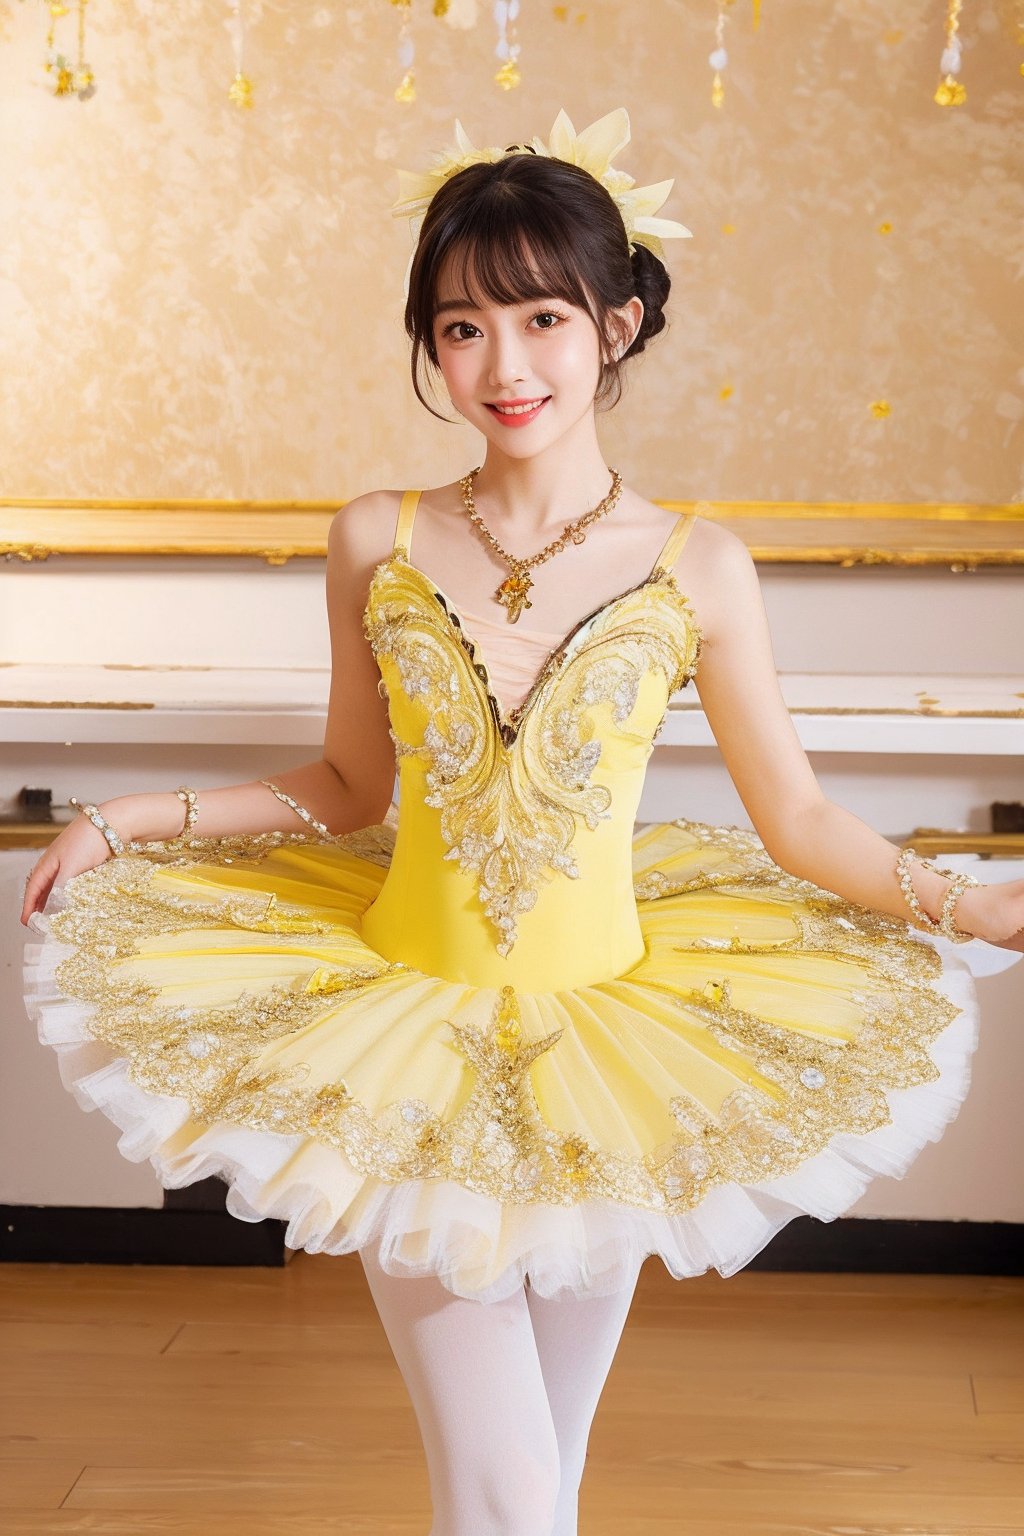 HDR,UHD,8K,best quality,masterpiece,Highly detailed,Studio lighting,ultra-fine painting,sharp focus,physically-based rendering,extreme detail description,Professional,masterpiece, best quality,delicate, beautiful,(1girl),(light yellow Ballet_tutu:1.5),(jewelry:1.5),lace,(looking_at_viewer:1.2), realistic,(blunt bangs:1.2),(hair bun),(standing:1),(hair ornament:1.2), (jewelry necklace:1),dance classroom background,(Half-length photo:1),(smile:1),(white lace stockings:1),